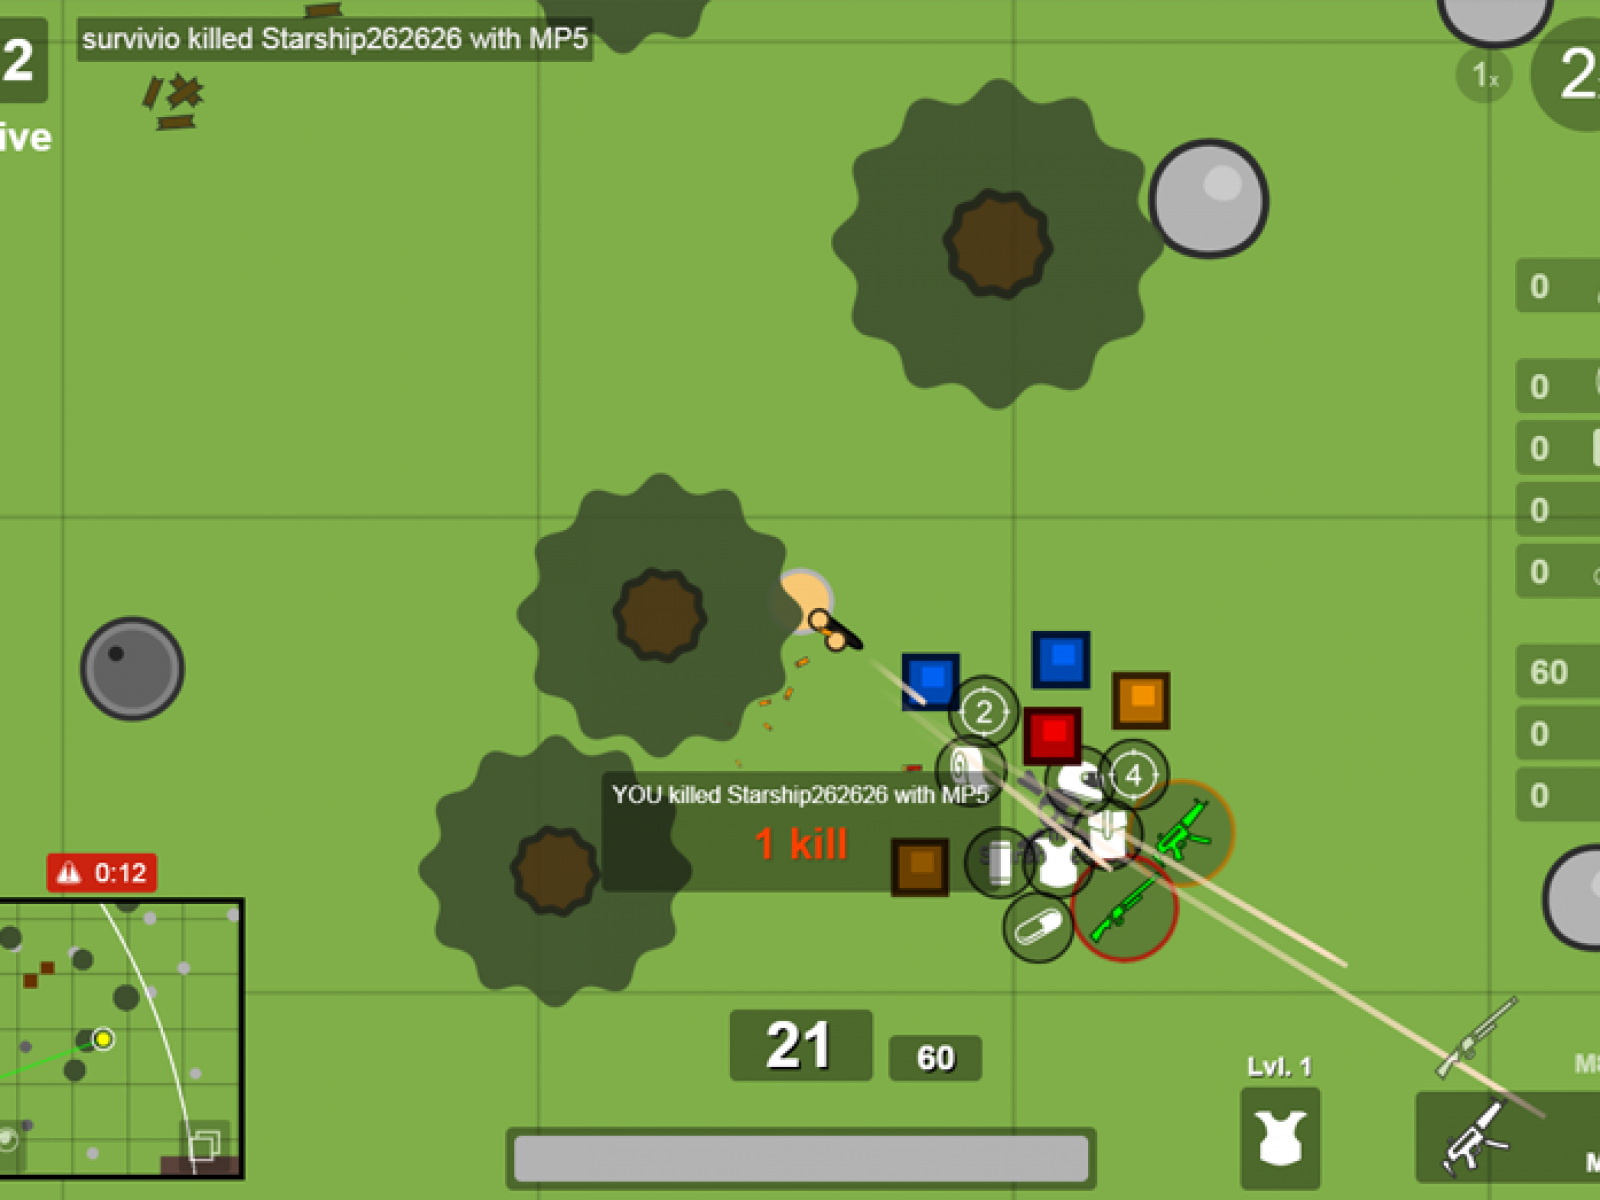 Best Battle Royale Games: Surviv.io, ZombsRoyale.io and Bruh.io are Worth a  Look